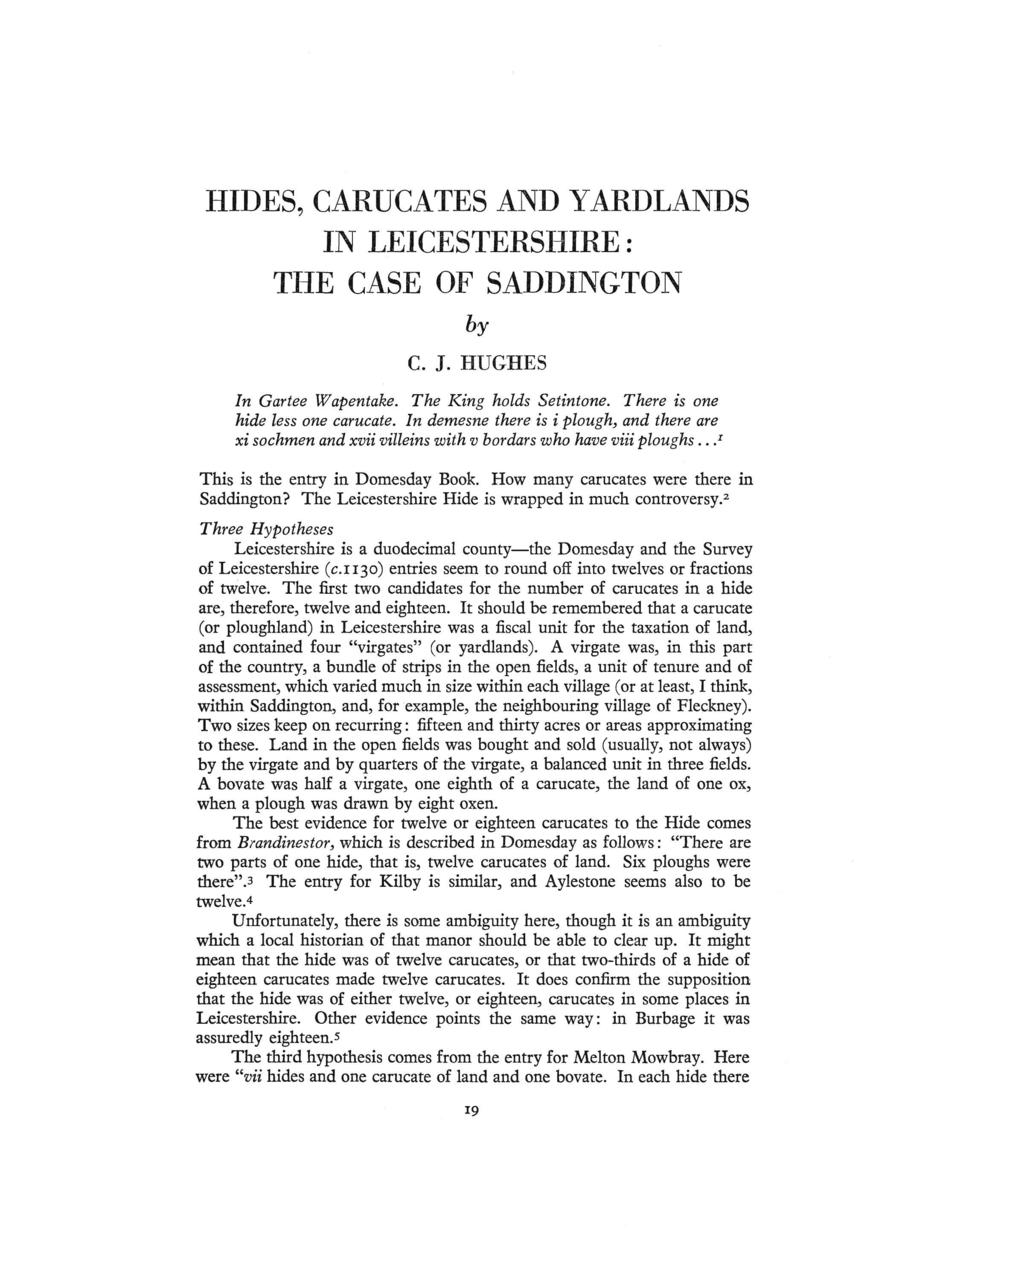 HIDES, CARUCATES AND YARDLANDS IN LEICESTERSHIRE : THE CASE OF SADDINGTON by C. J. HUGHES In Gartee W apentake. The King holds Setintone. There is one hide less one carucate.